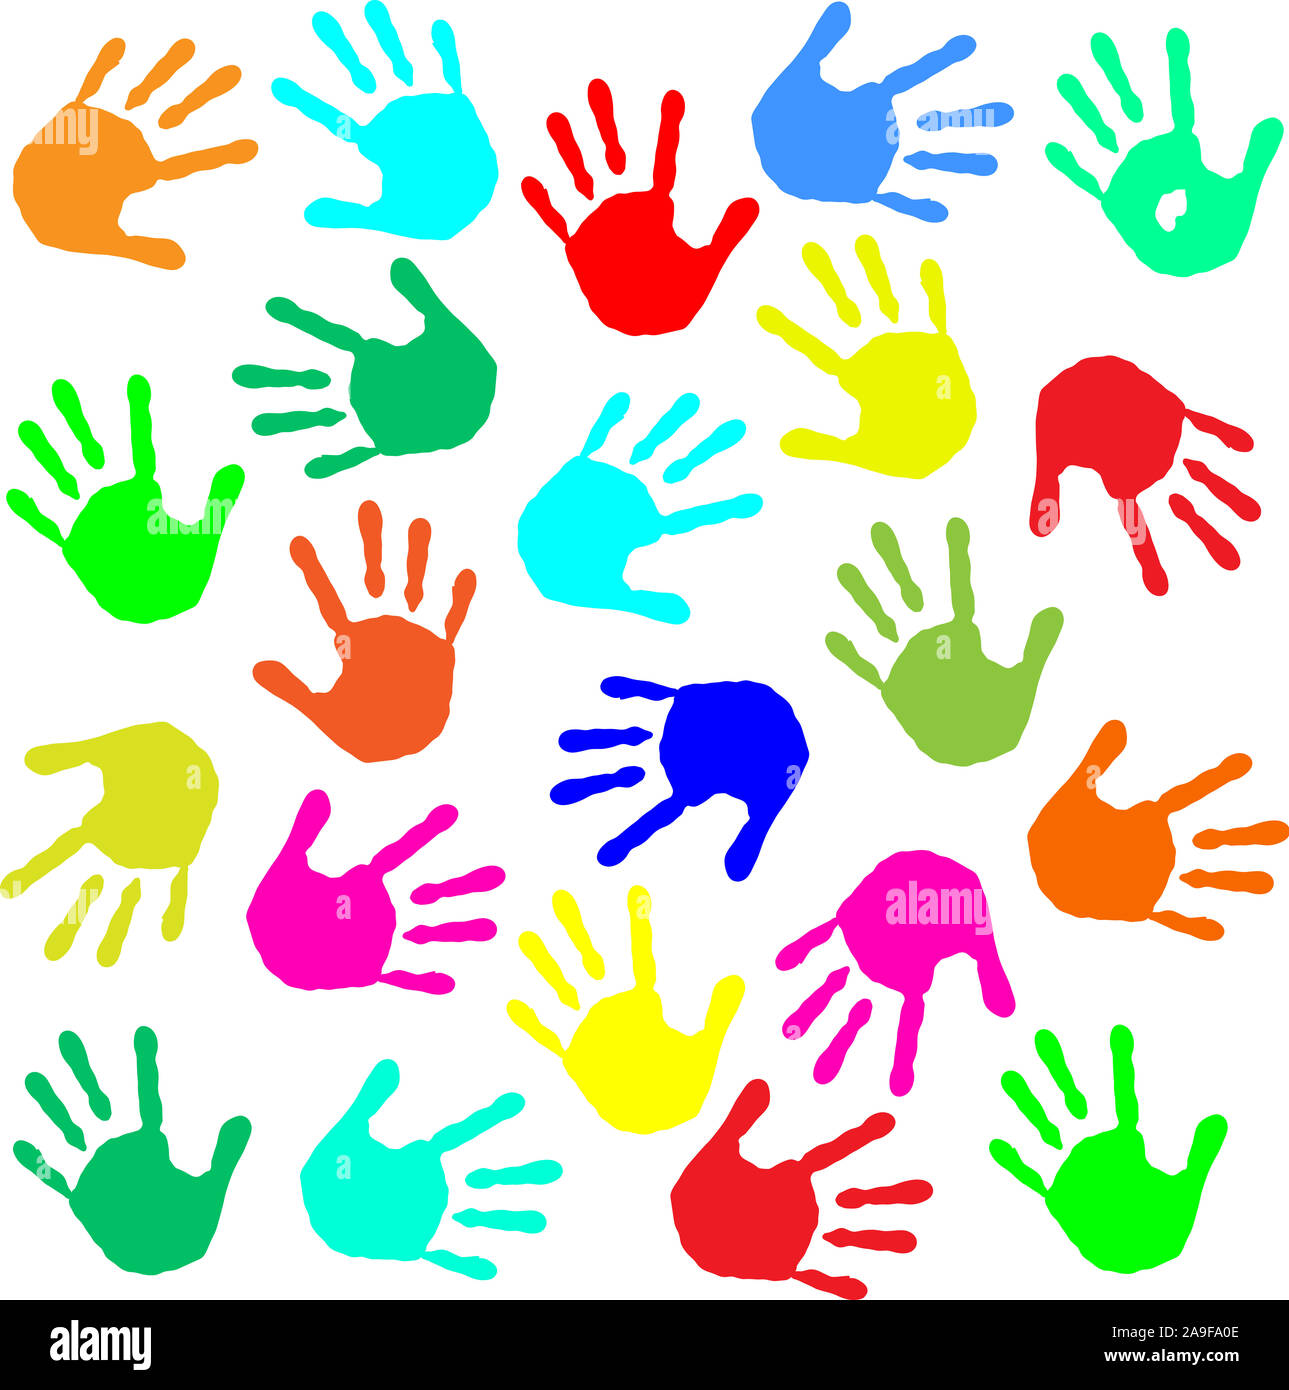 Many colorful hands Stock Photo